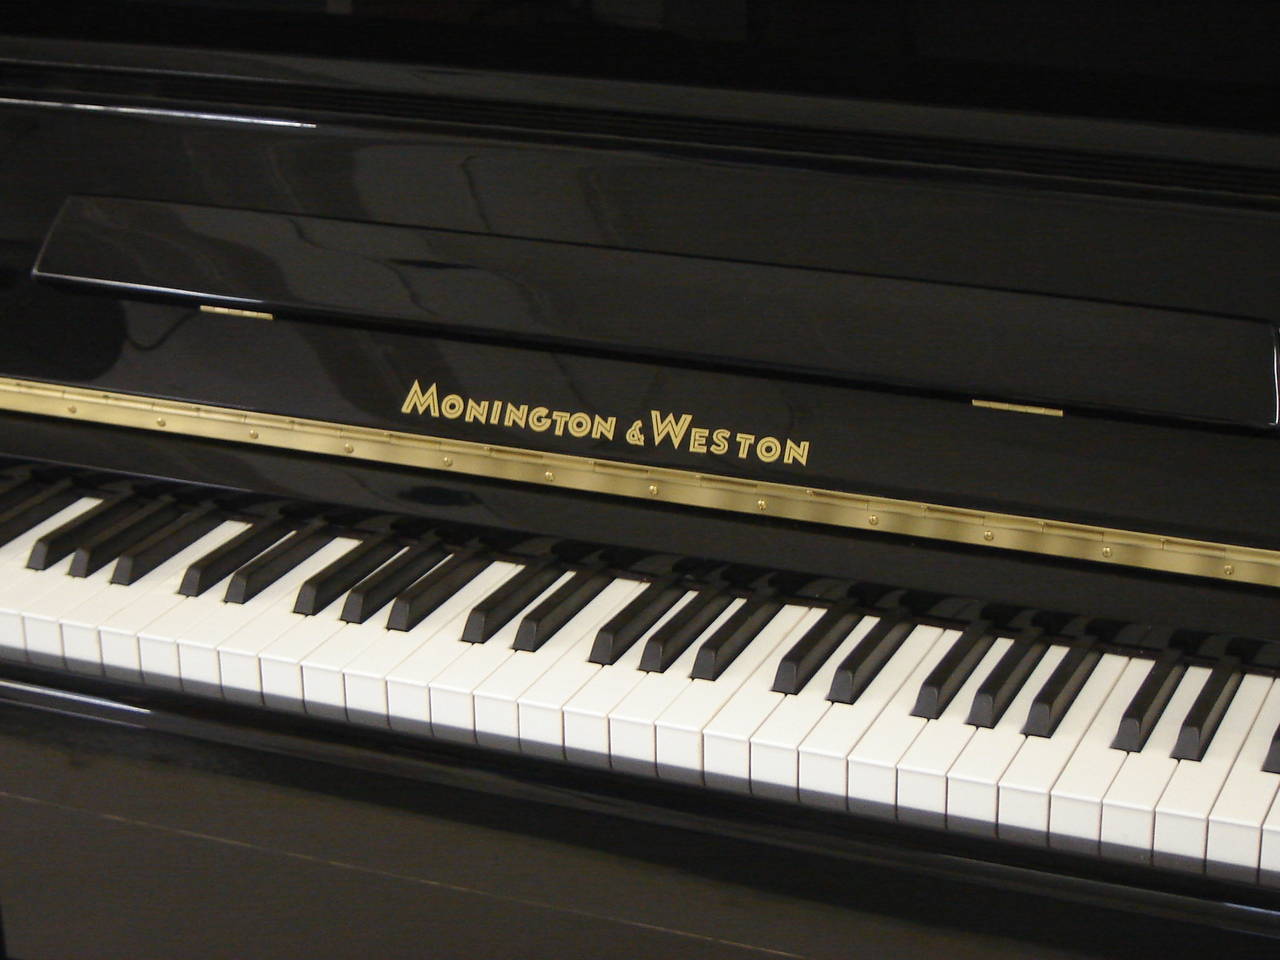 Monington & Weston 120cm traditional upright piano in black polished circa 2013 ex rental.

Full compass - 7¼ octaves – 88 notes, 
three pedals (Practise pedal).

Rent this piano on our home rental scheme for only £75.00 per month with an